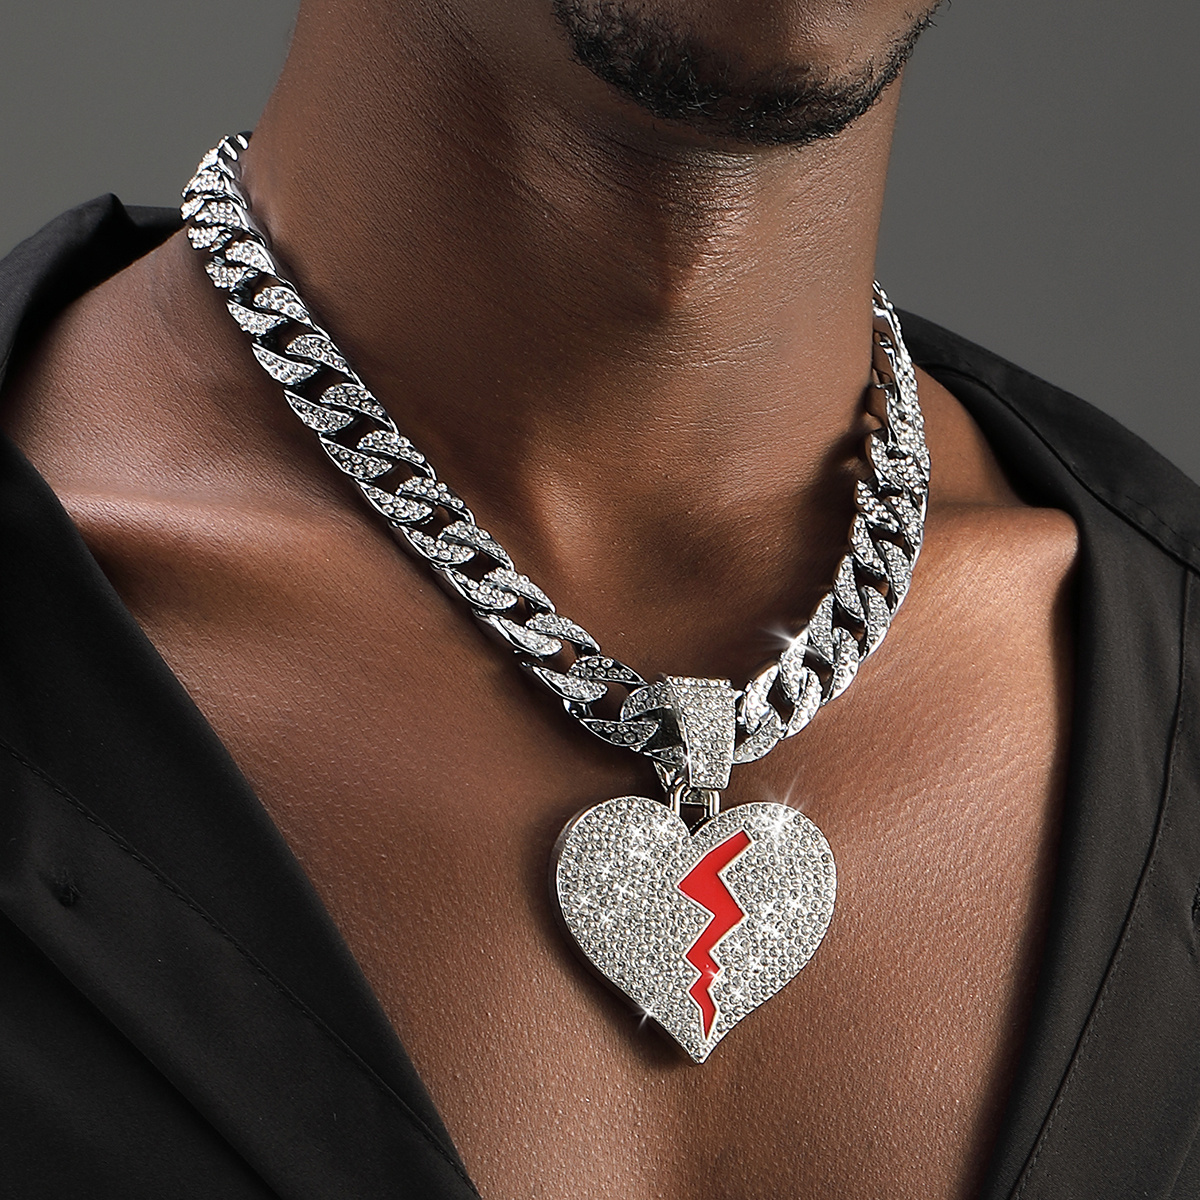 Cracking Love Pendant With Cuban Chain, Creative Necklace For Boyfriend